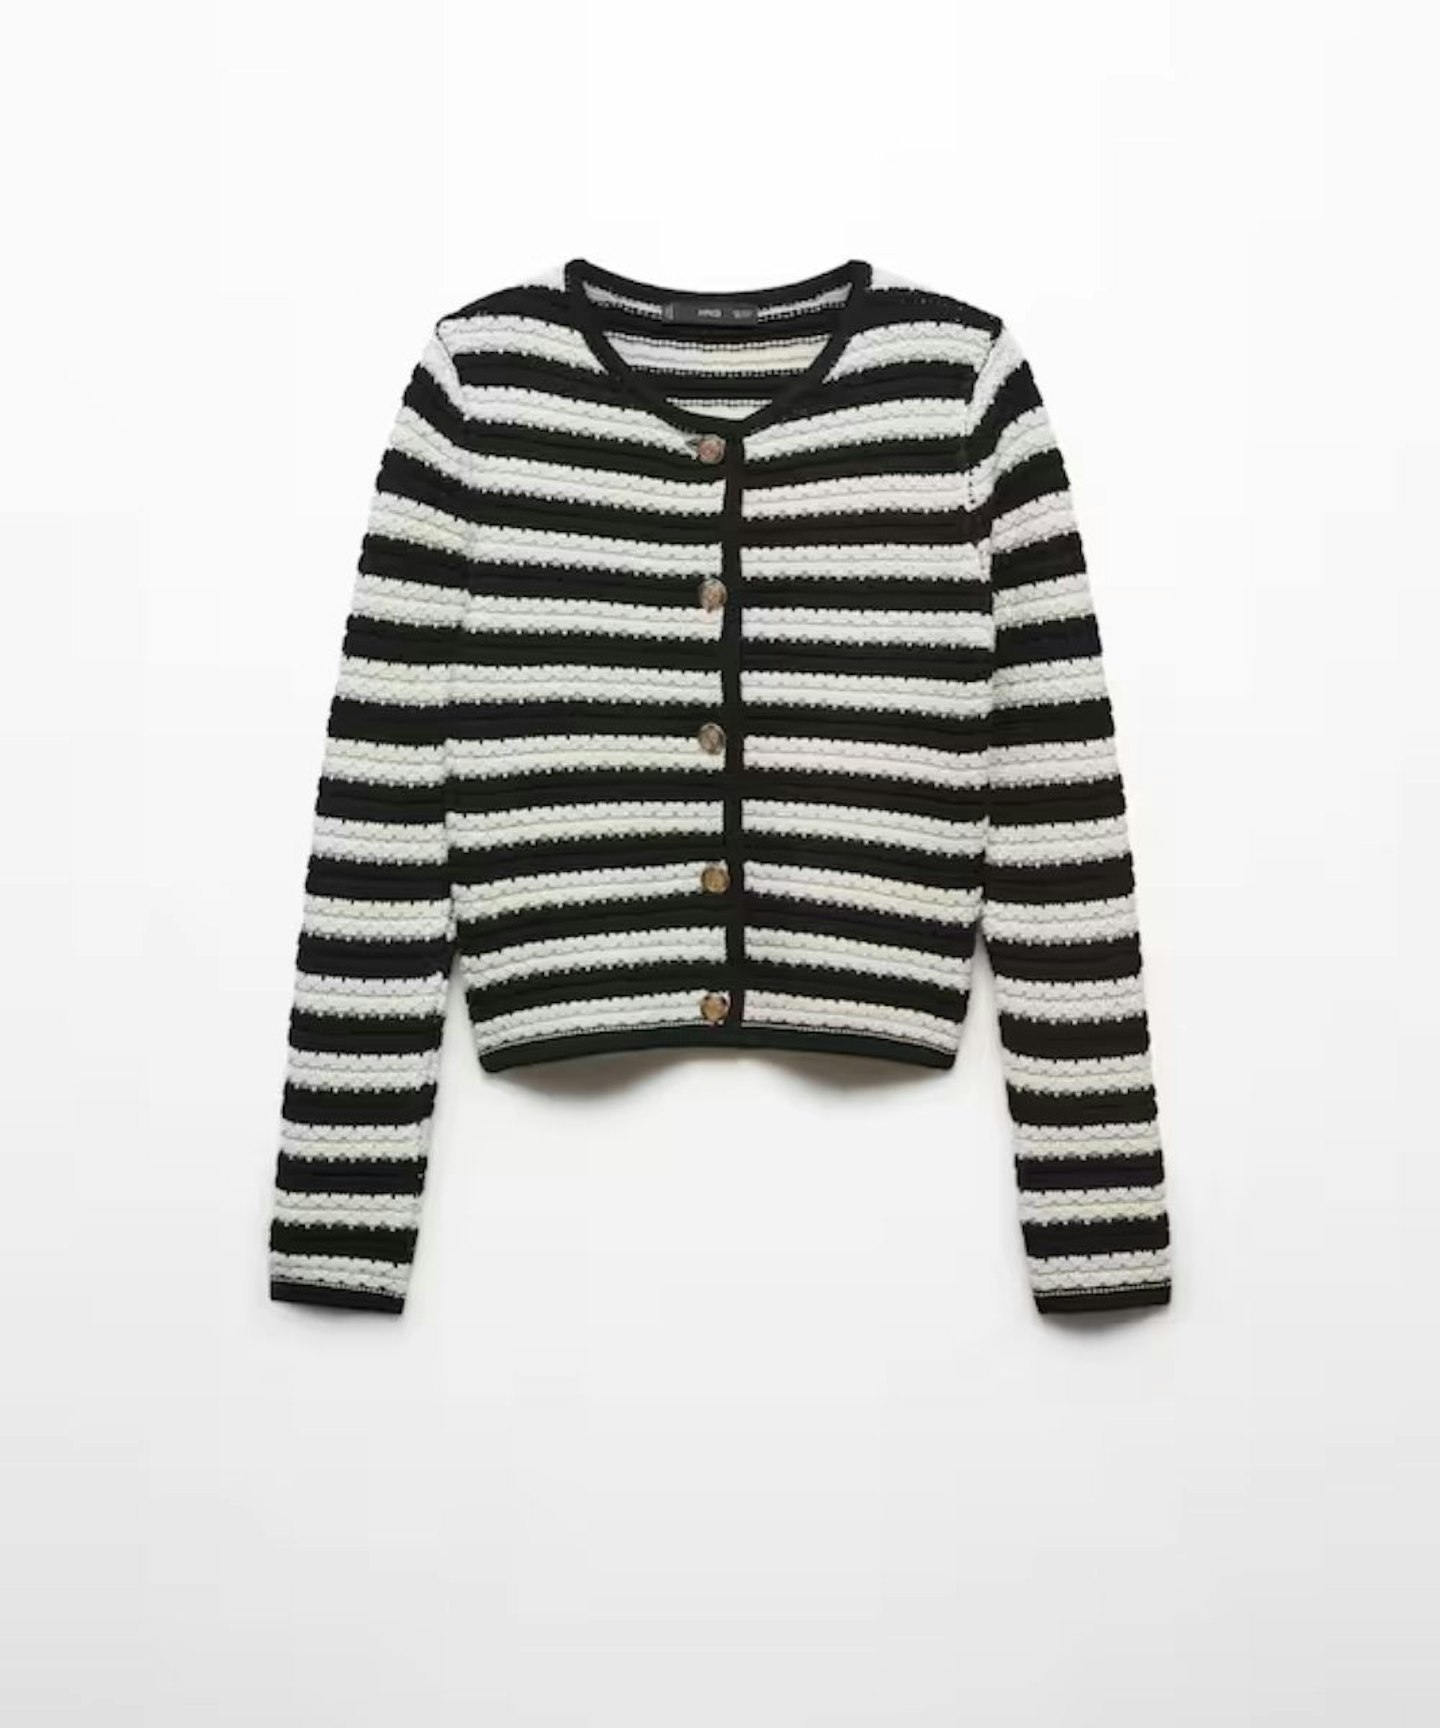 Mango Striped Cardigan with Jewel Buttons